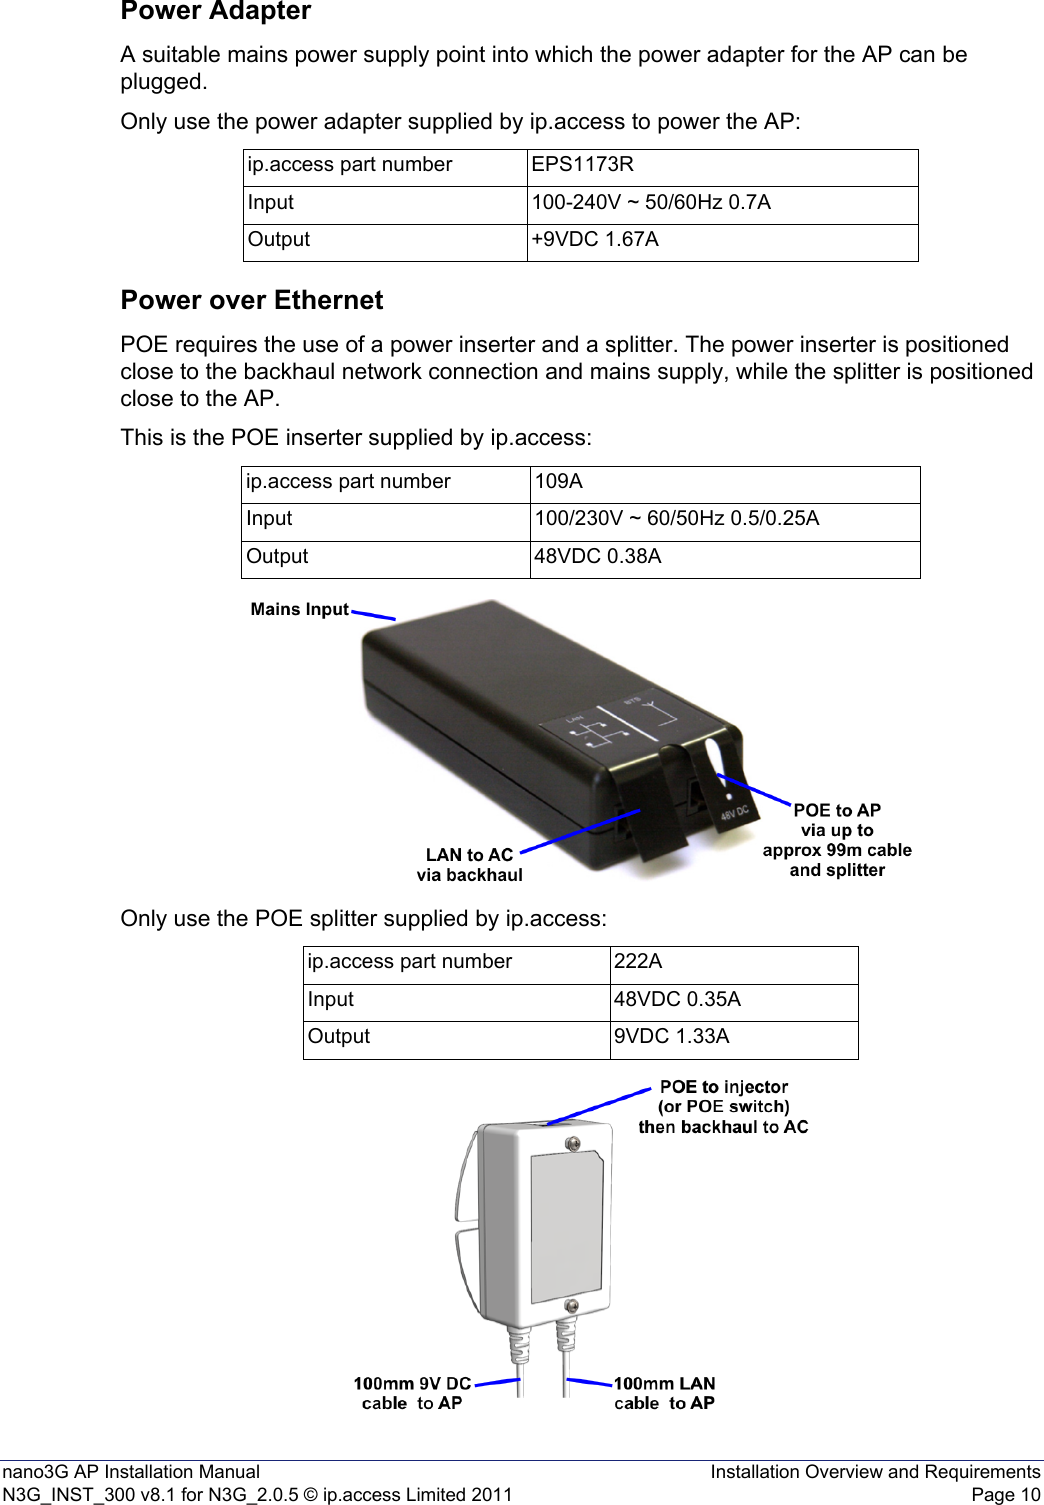 nano3G AP Installation Manual Installation Overview and RequirementsN3G_INST_300 v8.1 for N3G_2.0.5 © ip.access Limited 2011 Page 10Power AdapterA suitable mains power supply point into which the power adapter for the AP can be plugged.Only use the power adapter supplied by ip.access to power the AP:Power over EthernetPOE requires the use of a power inserter and a splitter. The power inserter is positioned close to the backhaul network connection and mains supply, while the splitter is positioned close to the AP.This is the POE inserter supplied by ip.access:Only use the POE splitter supplied by ip.access:ip.access part number EPS1173RInput 100-240V ~ 50/60Hz 0.7AOutput +9VDC 1.67Aip.access part number 109AInput 100/230V ~ 60/50Hz 0.5/0.25AOutput 48VDC 0.38Aip.access part number 222AInput 48VDC 0.35AOutput 9VDC 1.33A